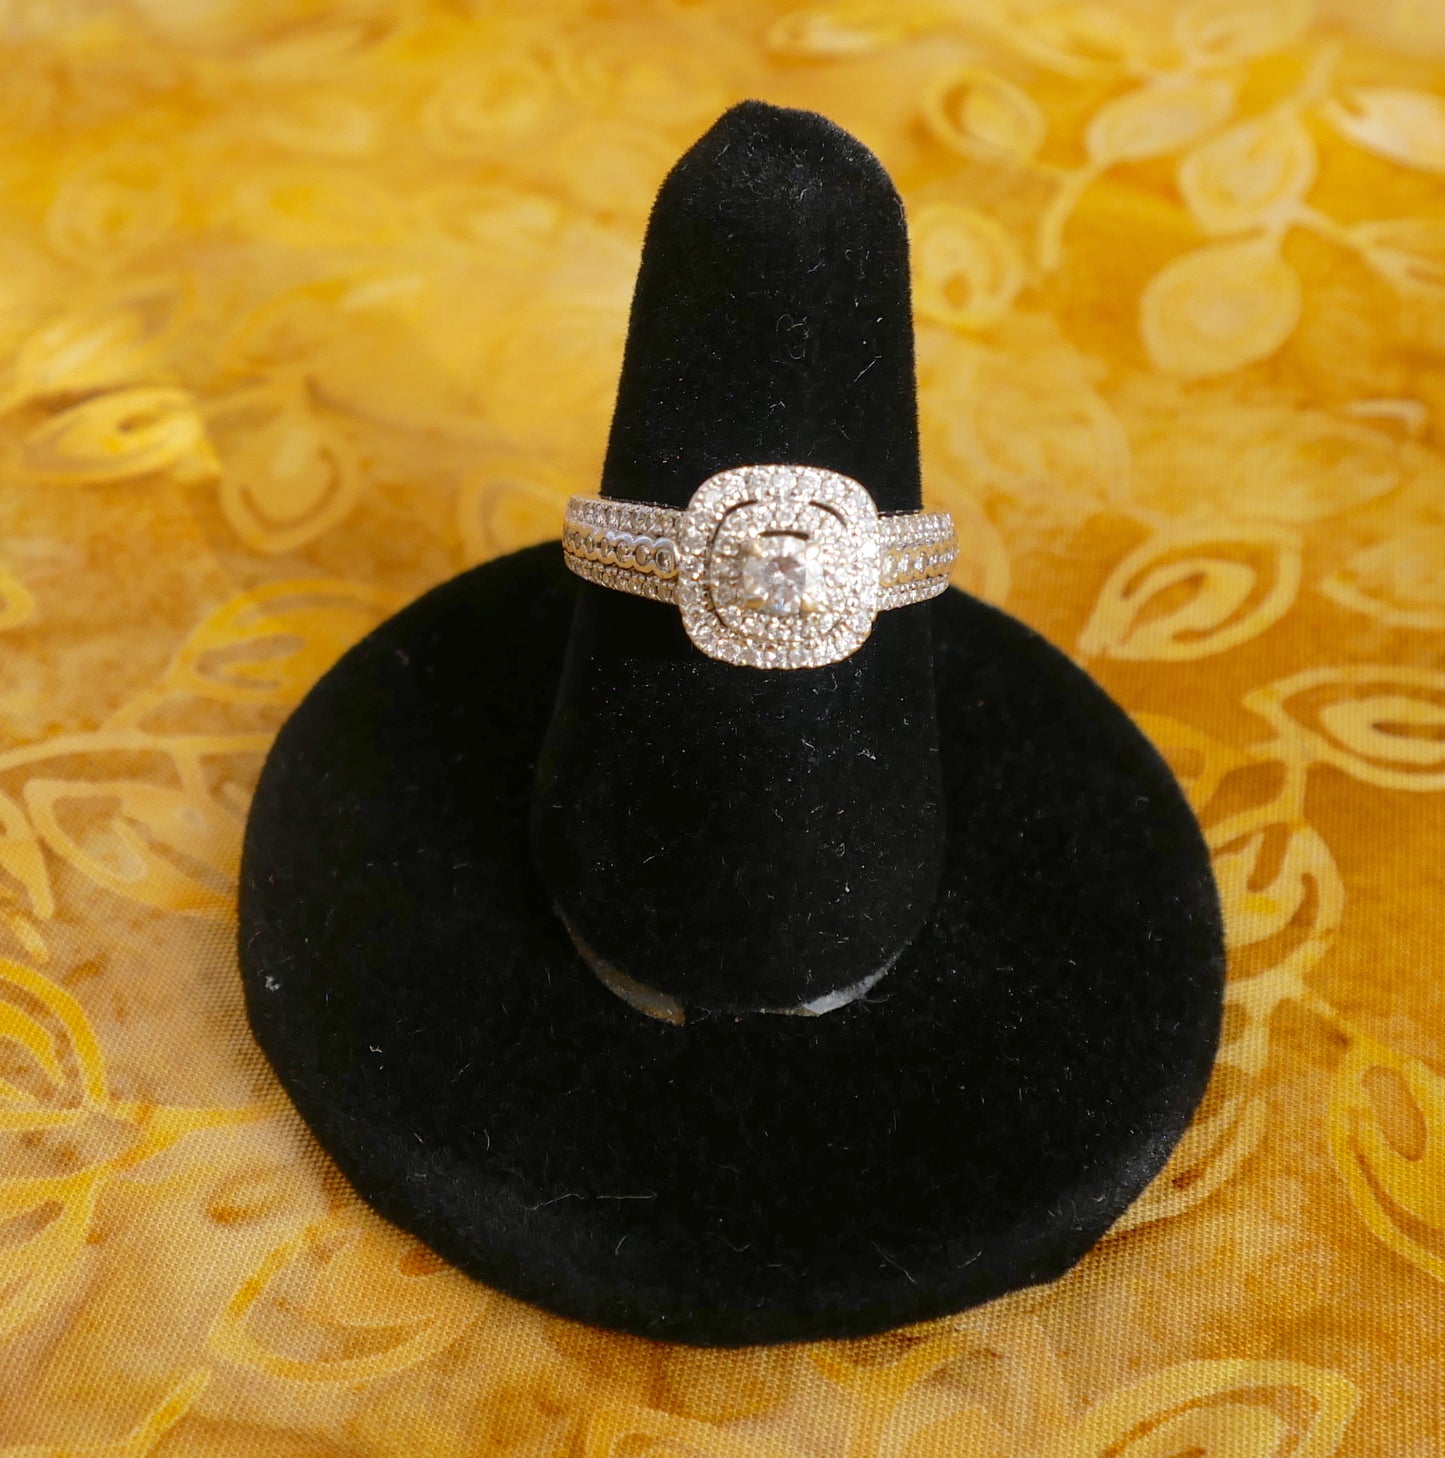 3 Carat Diamond Ring with Jewel Encrusted White Gold Band